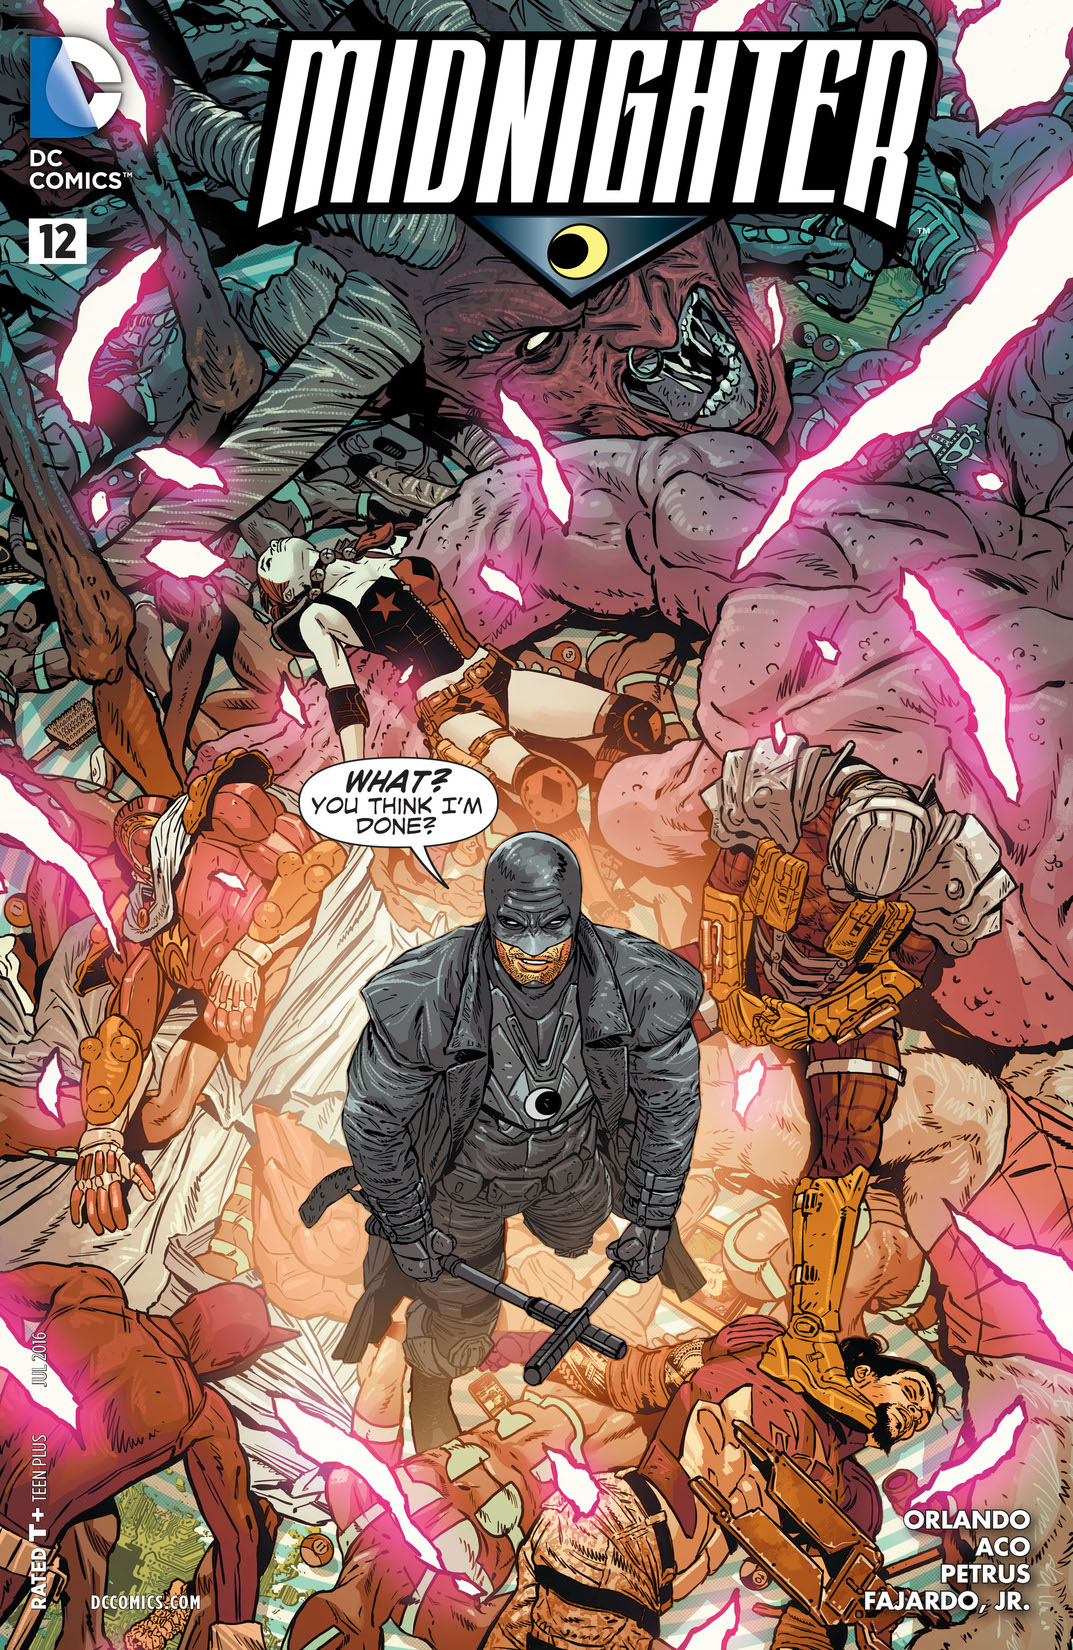 Midnighter (2015-) #12 preview images